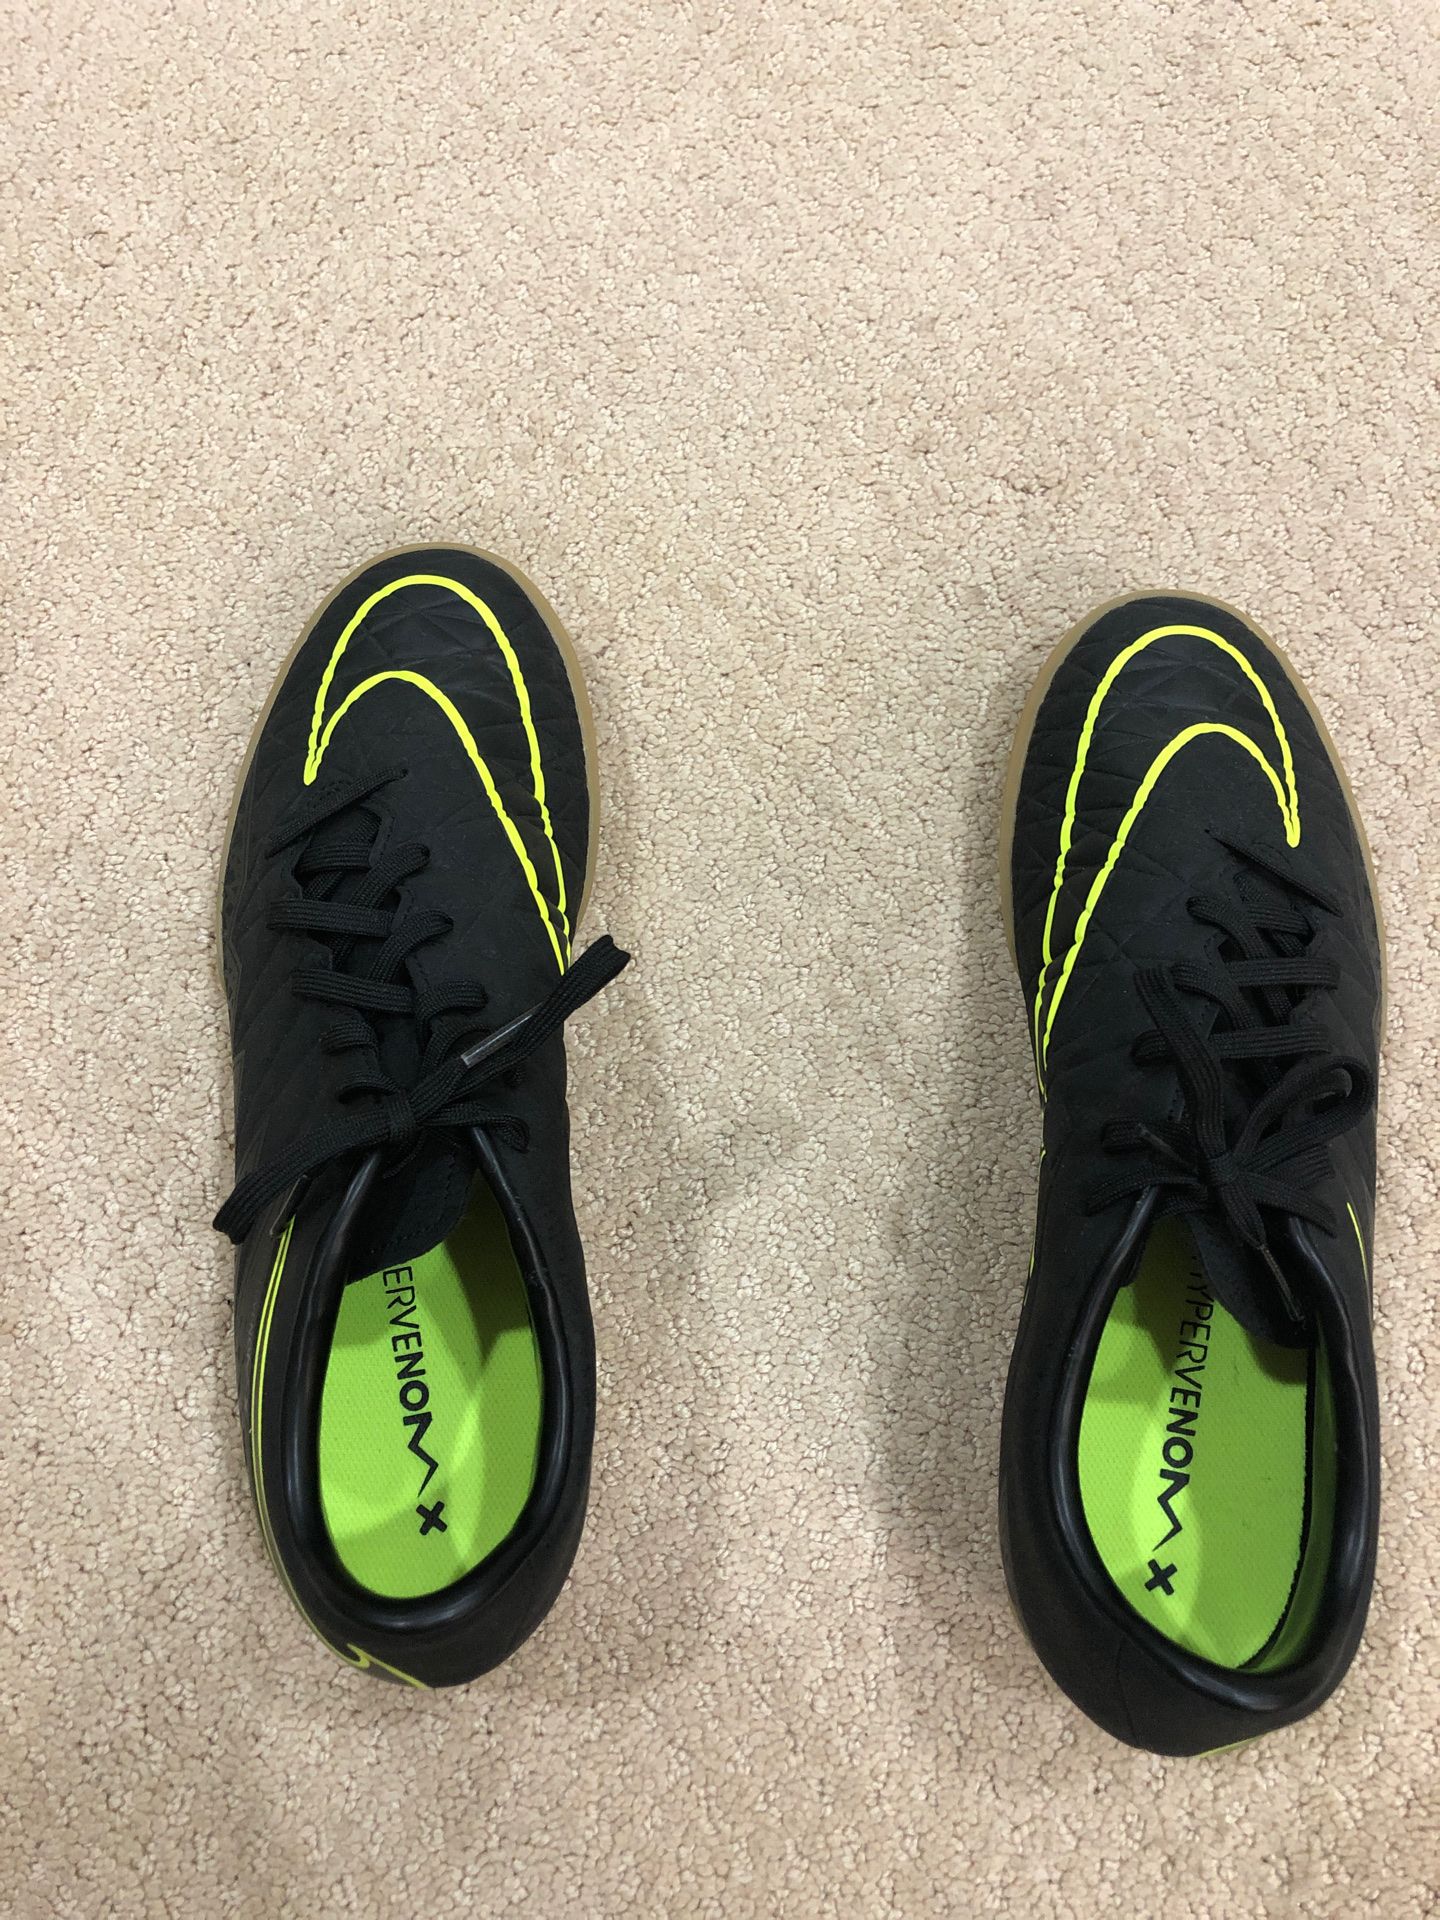 Indoor Soccer Shoes Size: 8